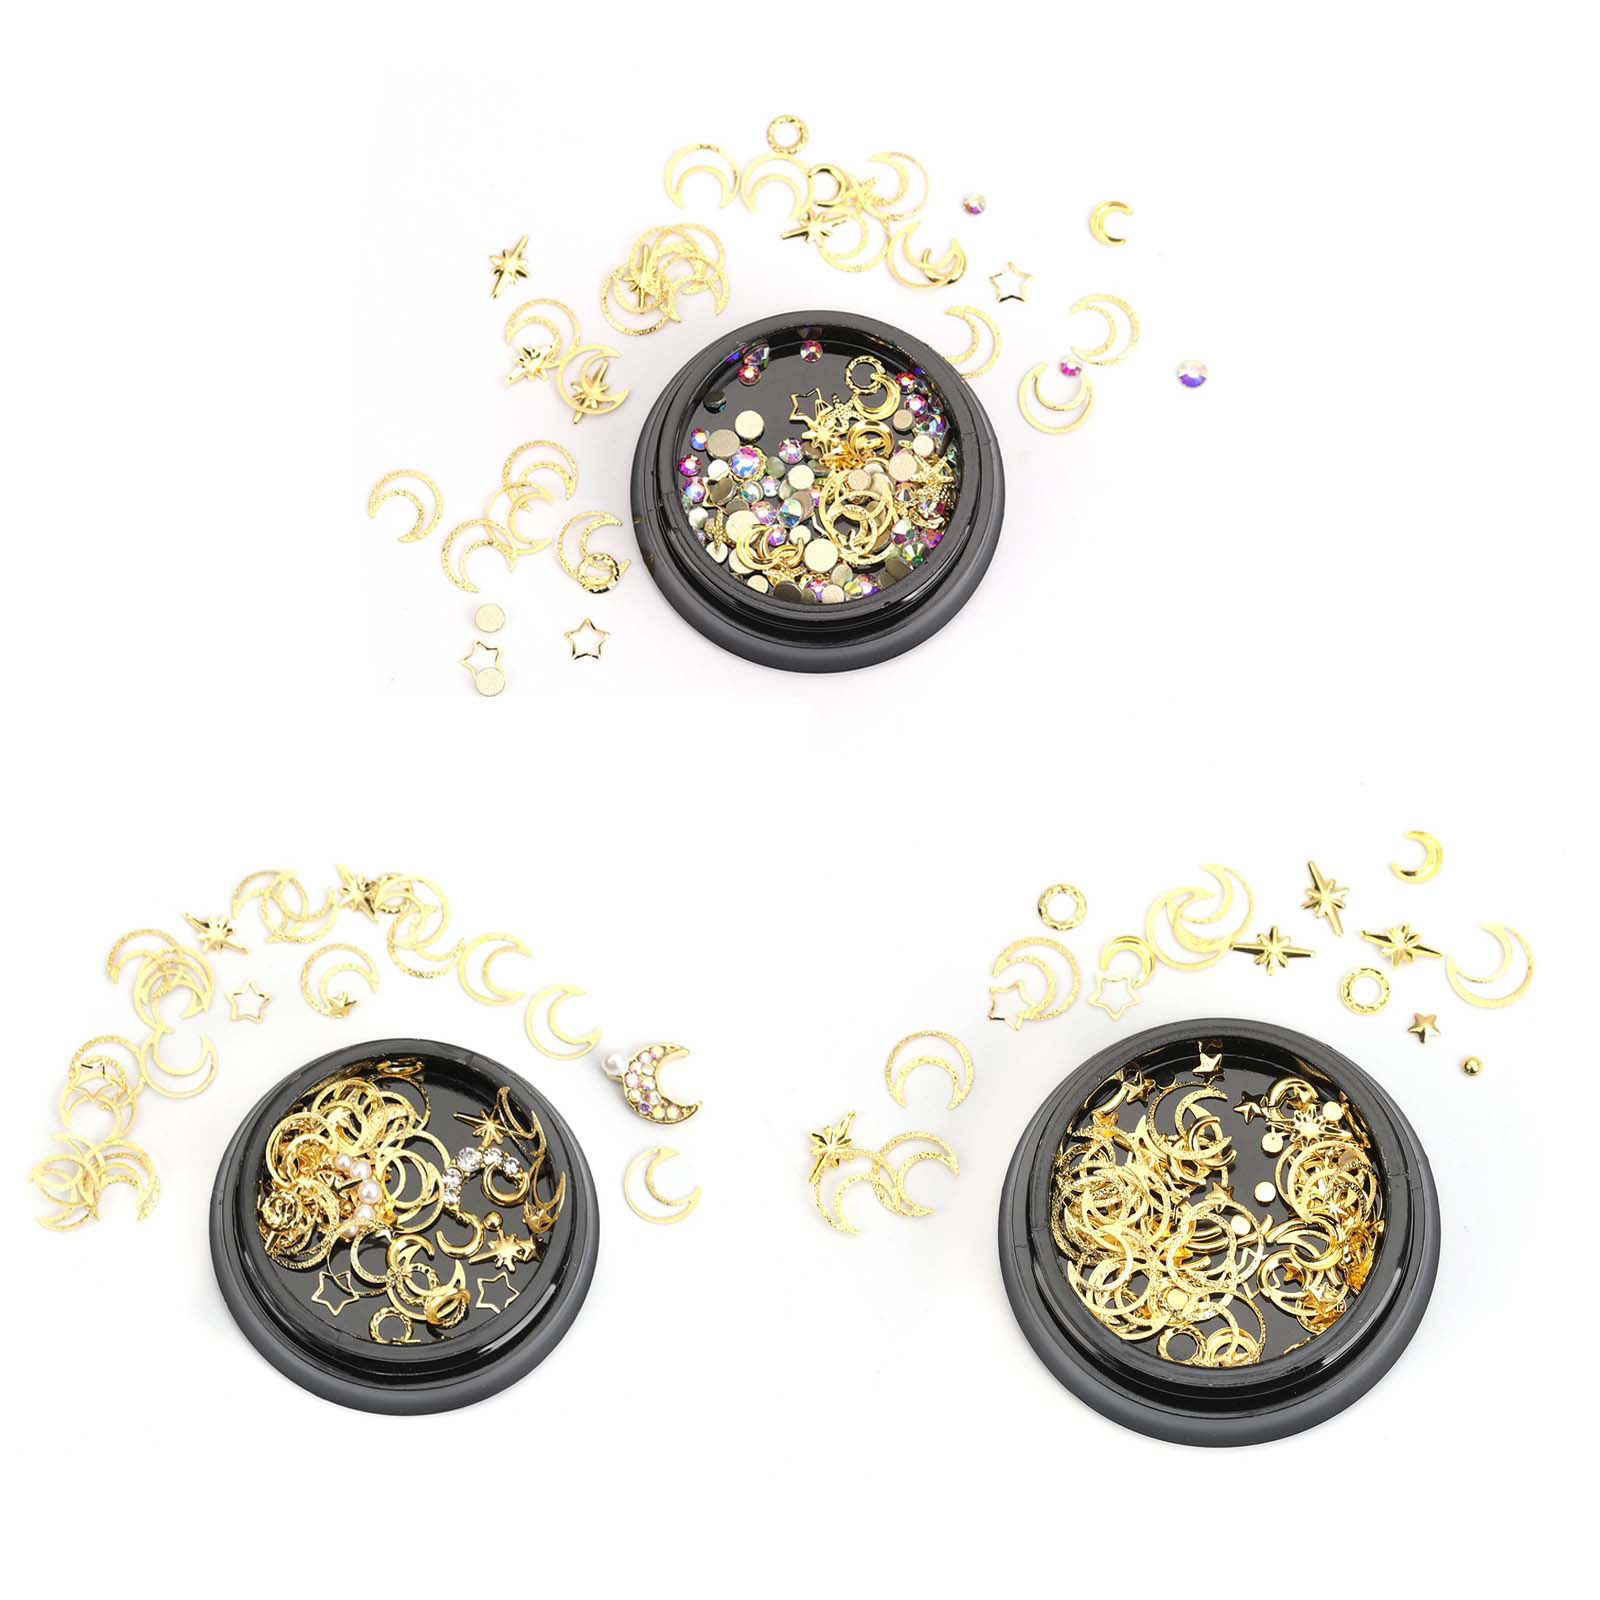 Picture of Zinc Metal Alloy & Rhinestone Resin Jewelry Craft Filling Material Round 